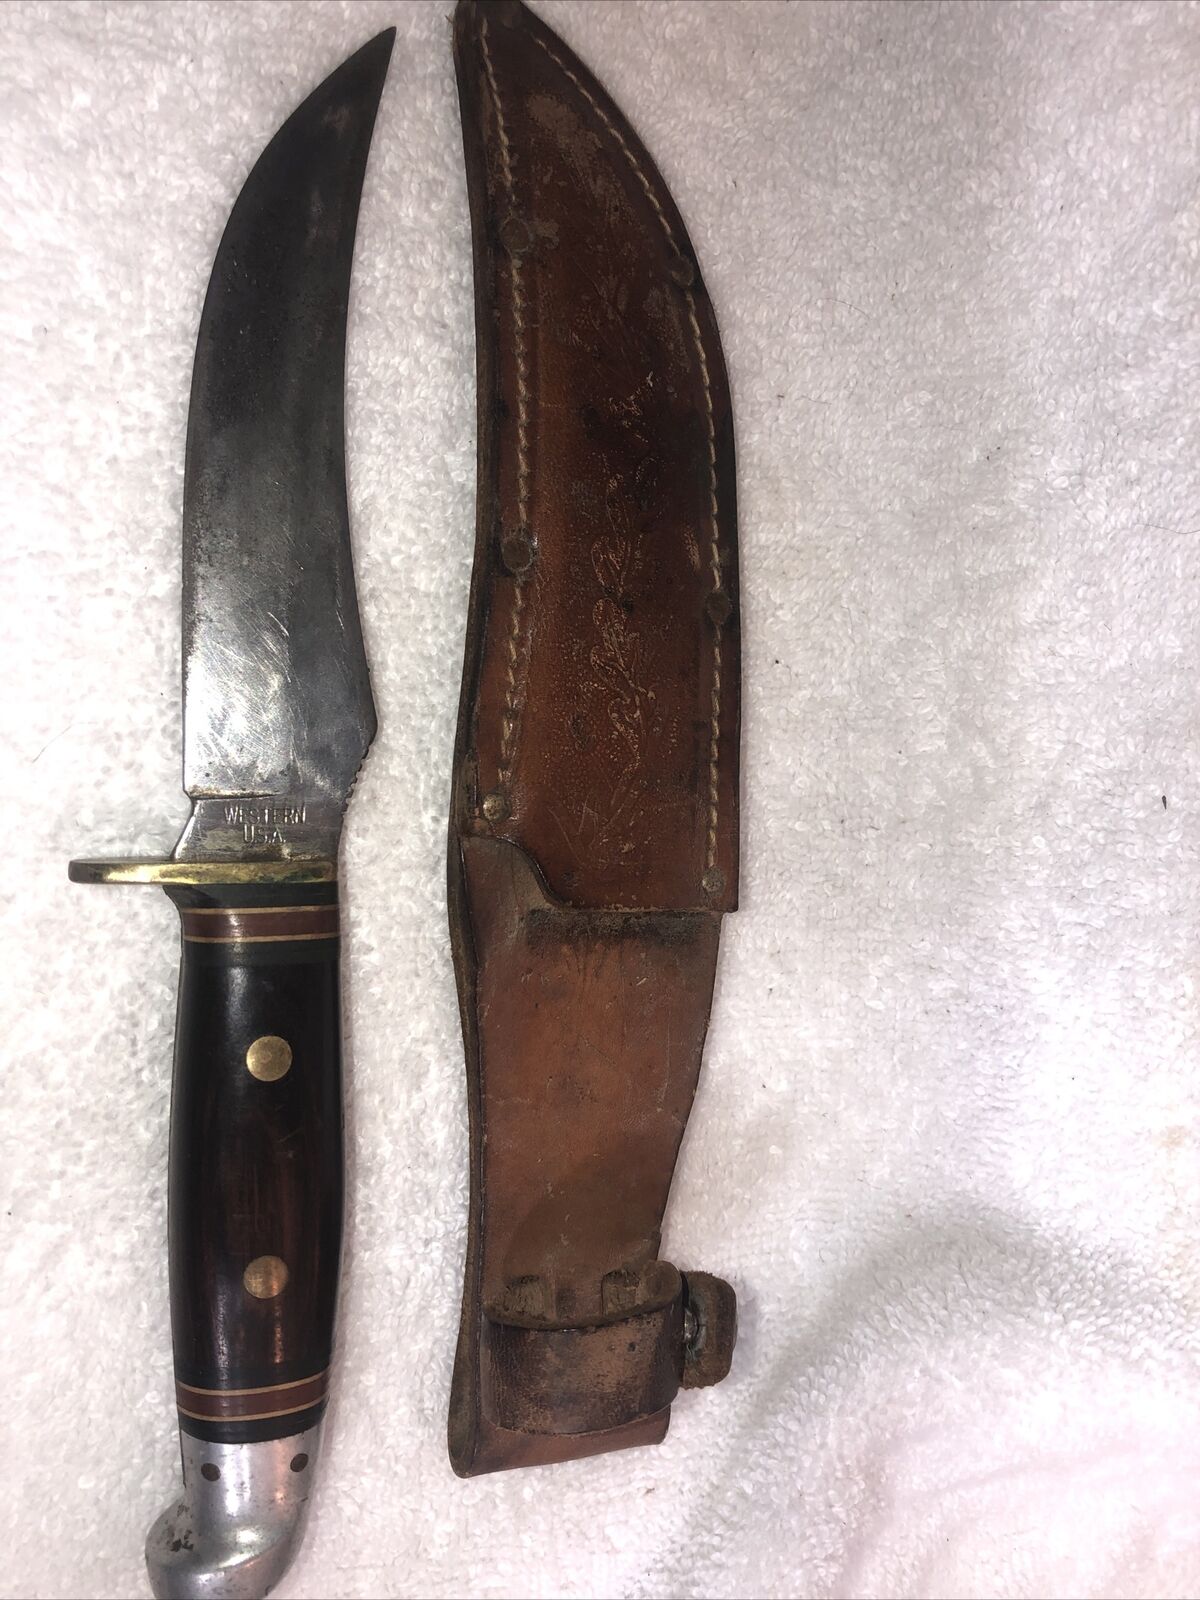 Vintage Western W39 Fixed Blade Knife w/ Leather Sheath - Made in USA